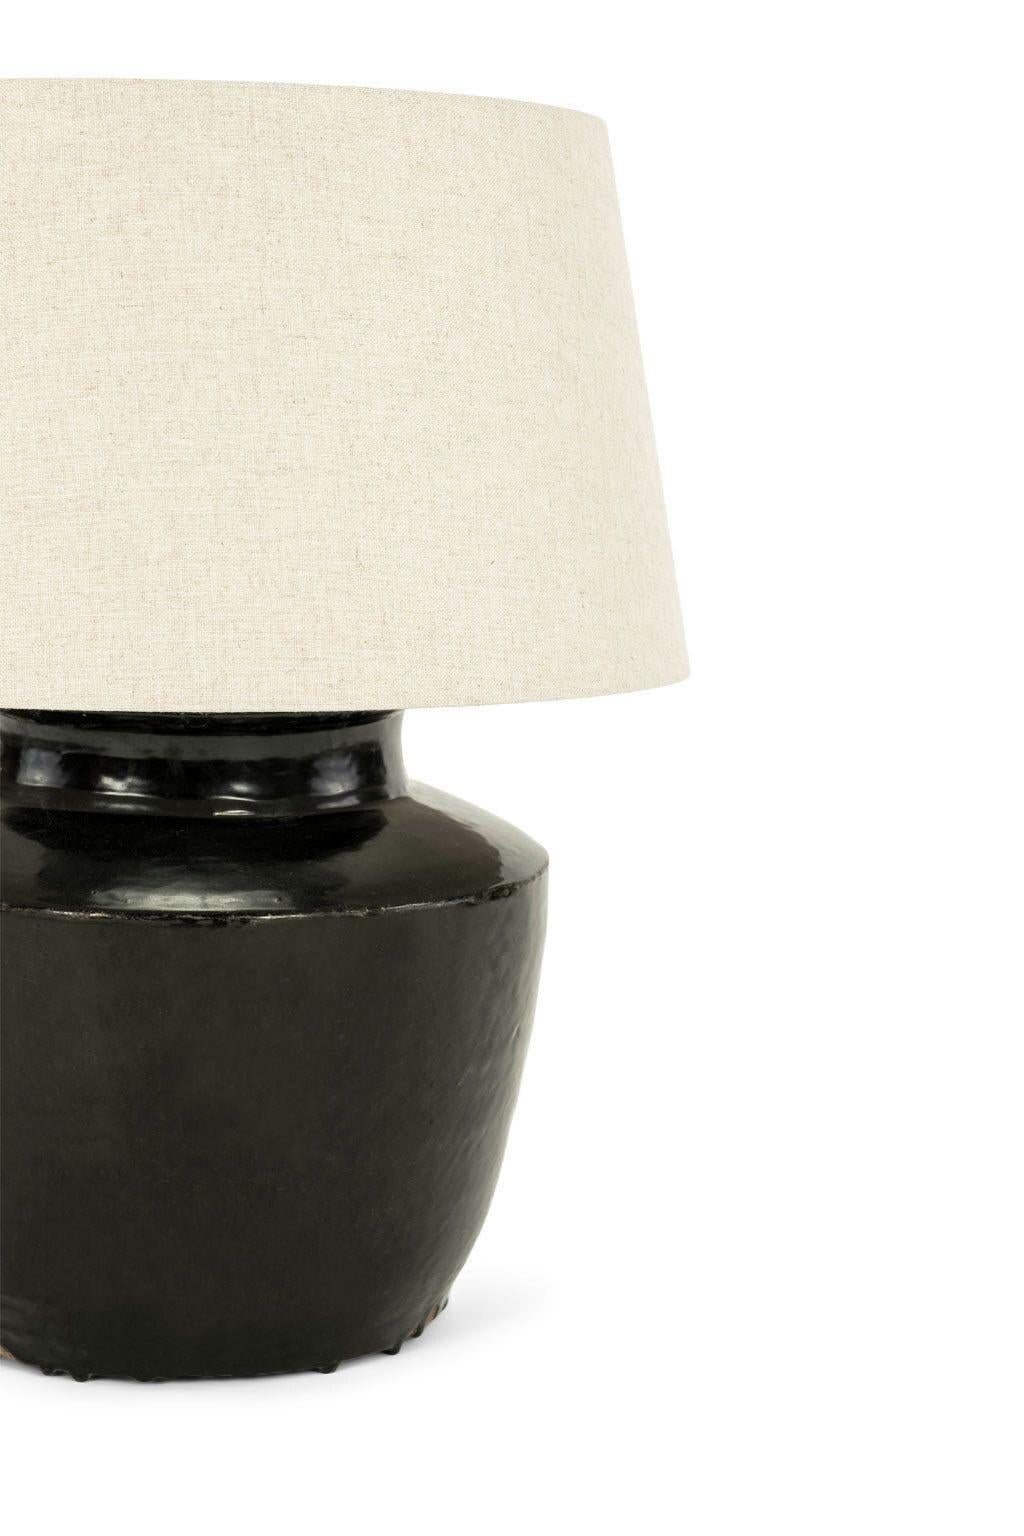 Black glazed terracotta lamp, newly wired for use within the USA with line switch. Includes off-white linen drum European uno shade (listed measurements include shade).